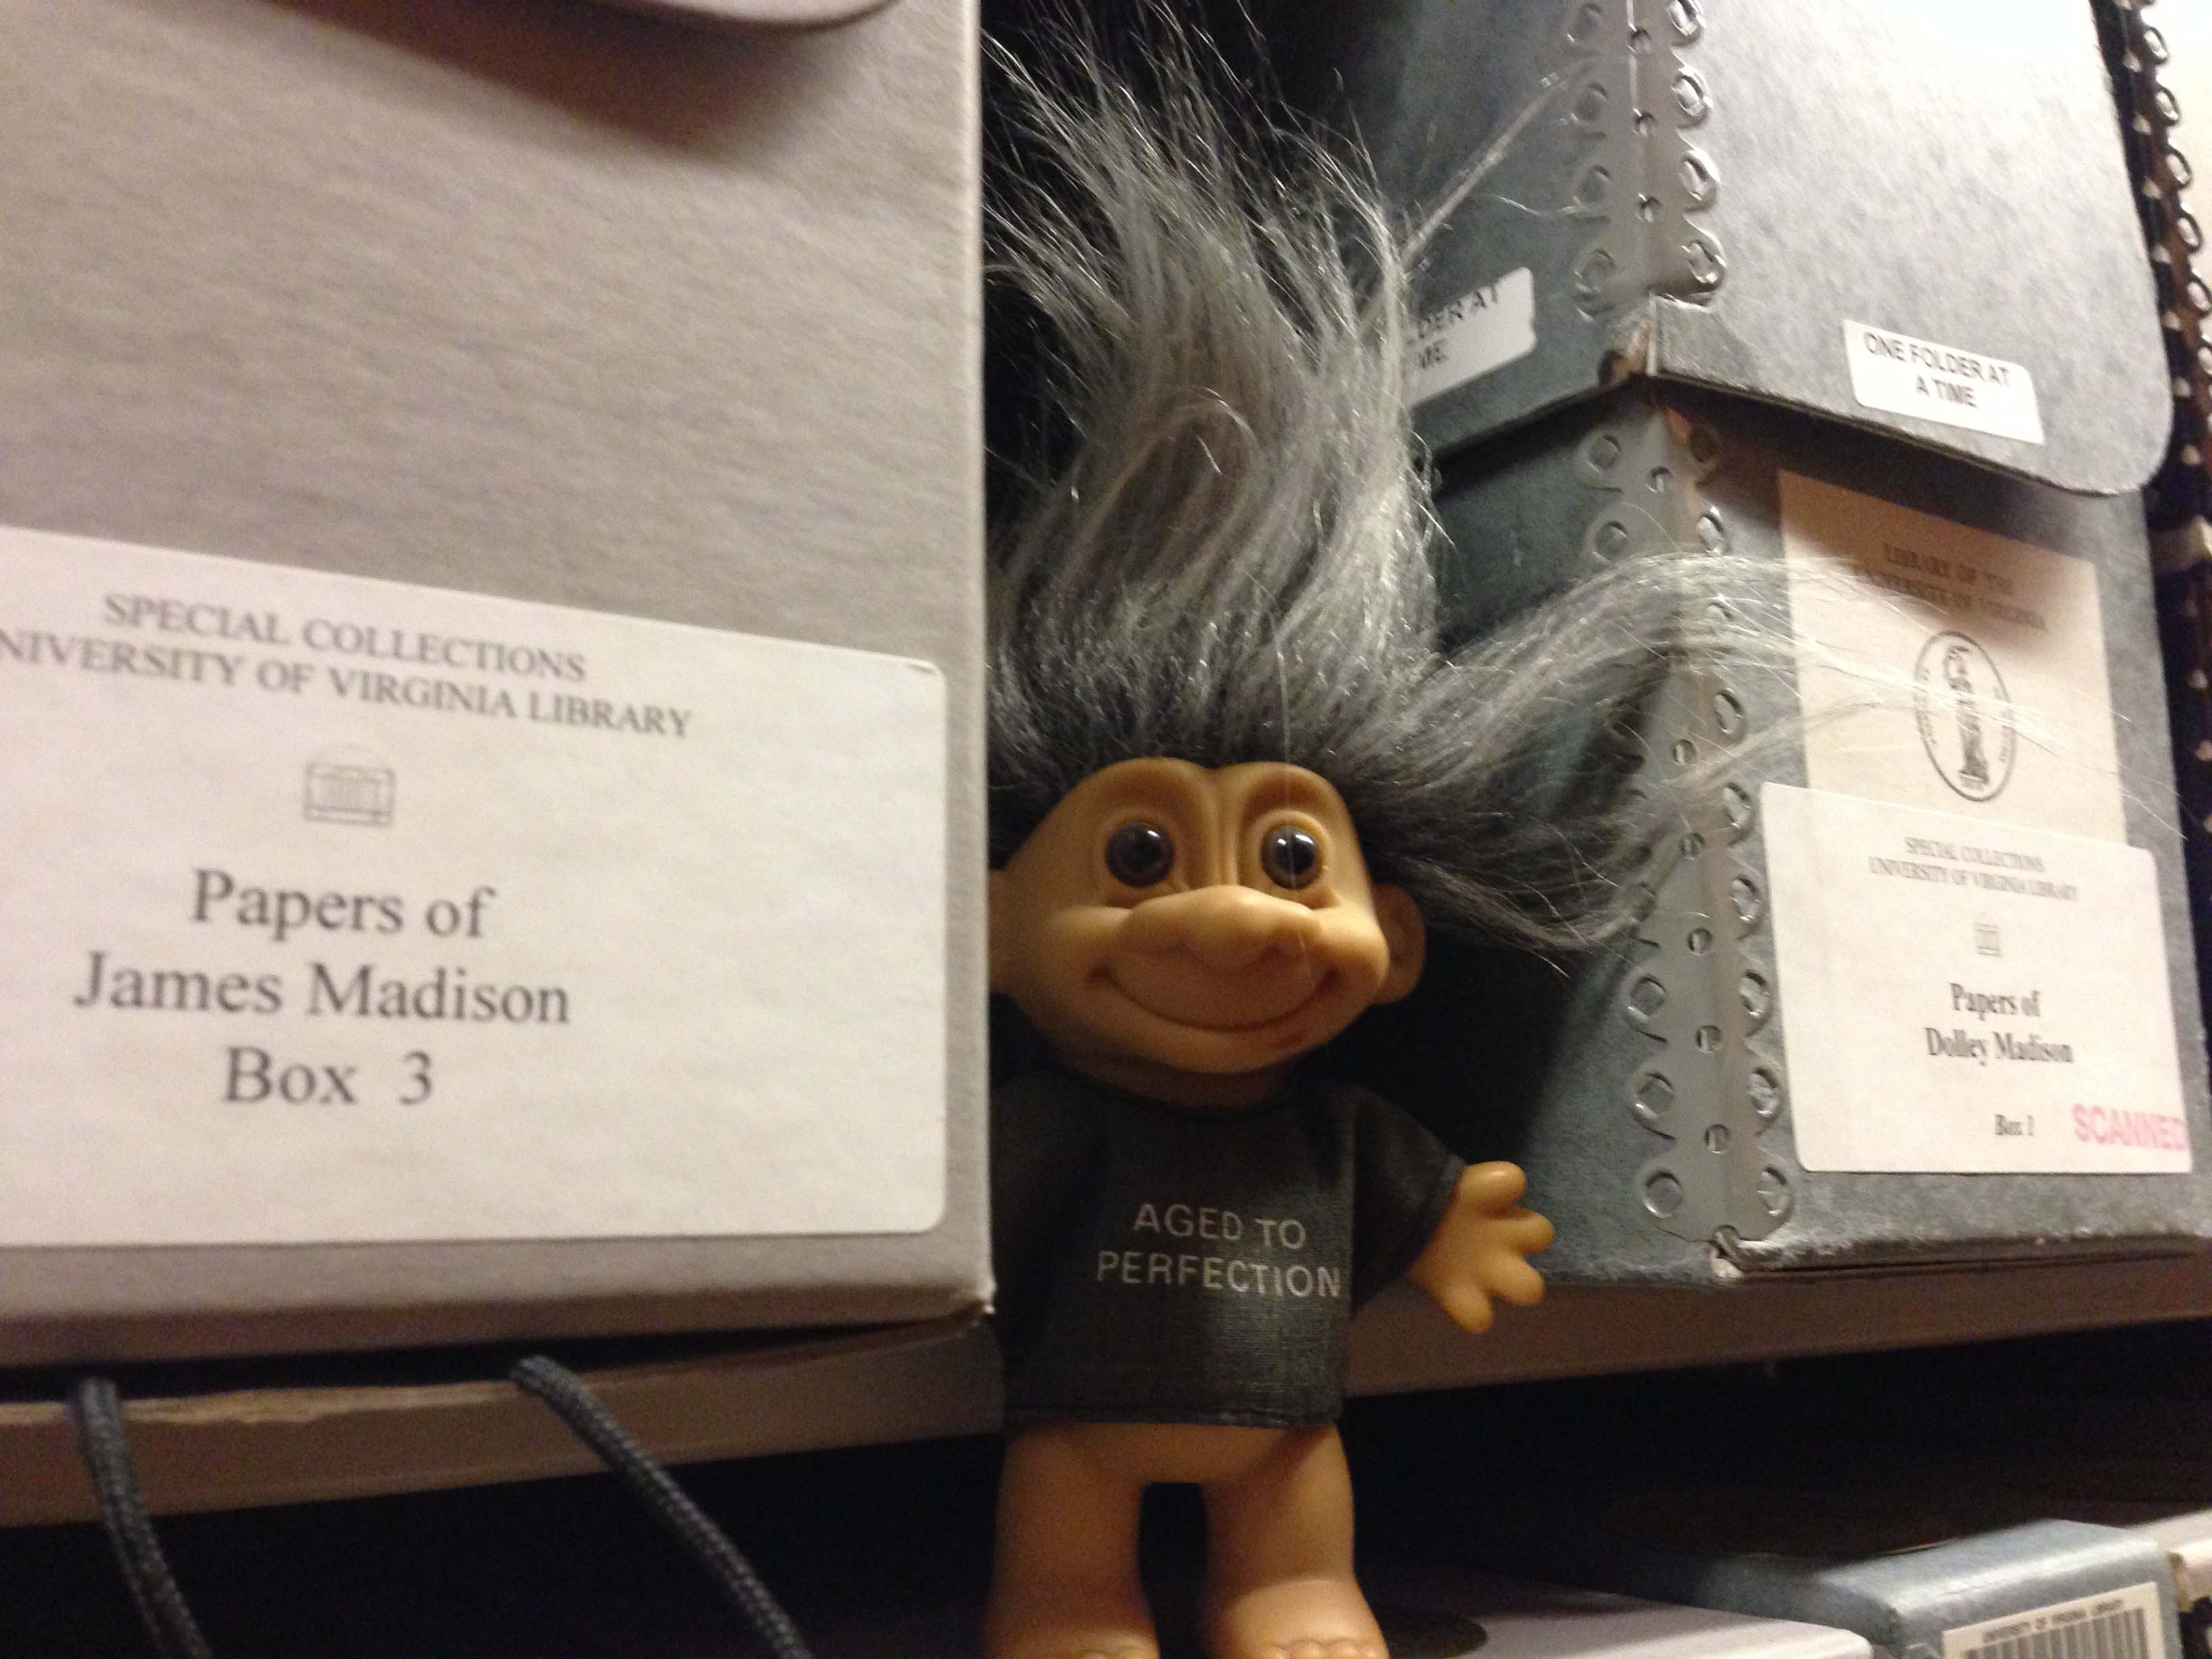 Since Tiffany's arrival we've experienced a sharp uptick in troll sightings in the stacks. Fortunately, trolls produce no threat to collection materials, but we are monitoring the situation just in case. 